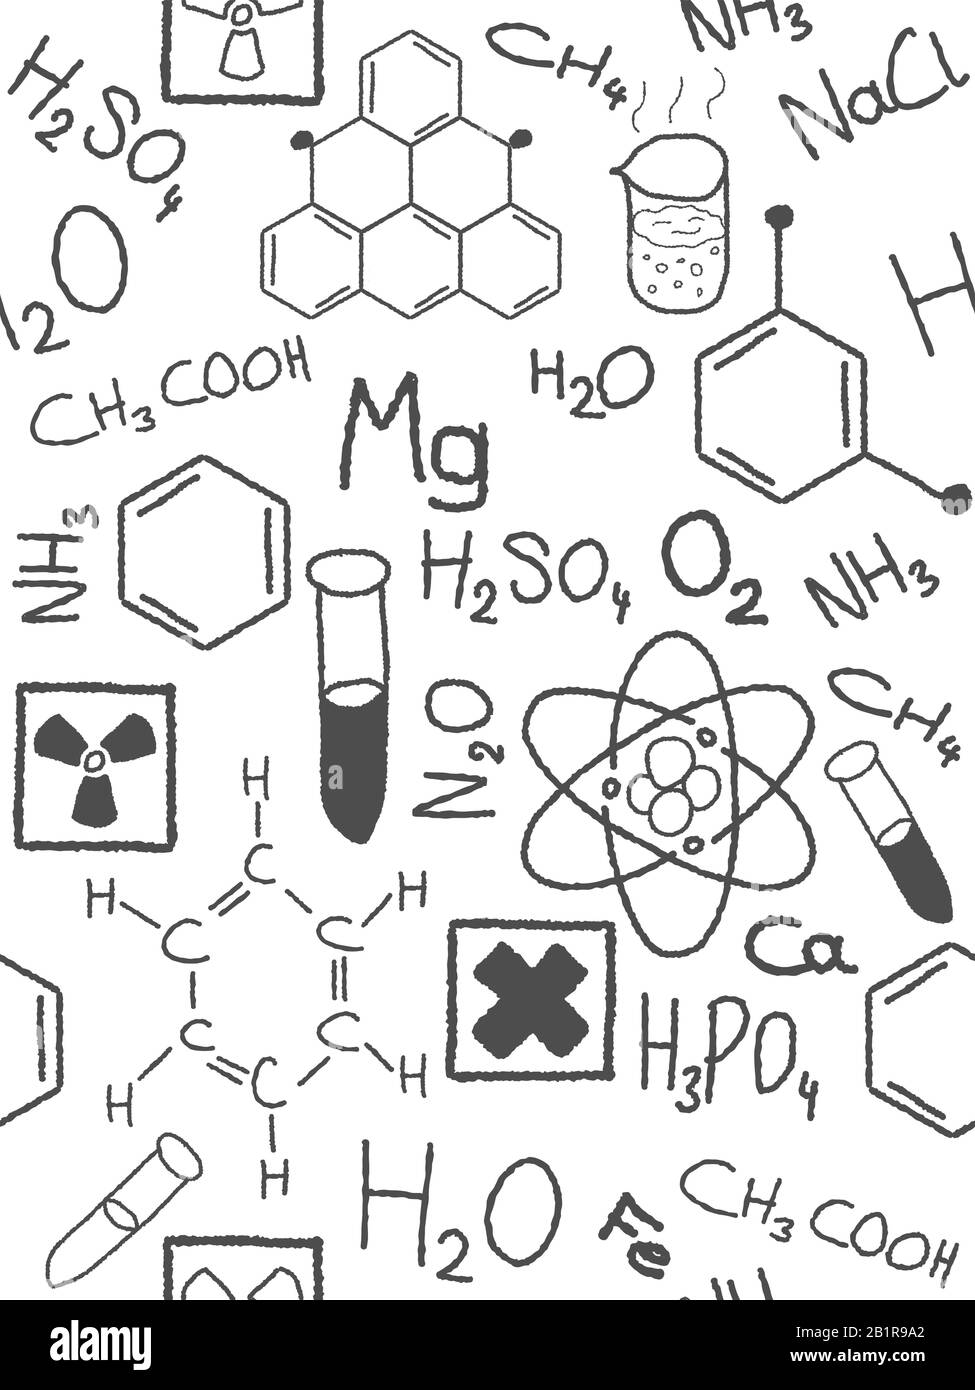 Chemistry doodle background texture - sketchy seamless illustration. Stock Vector